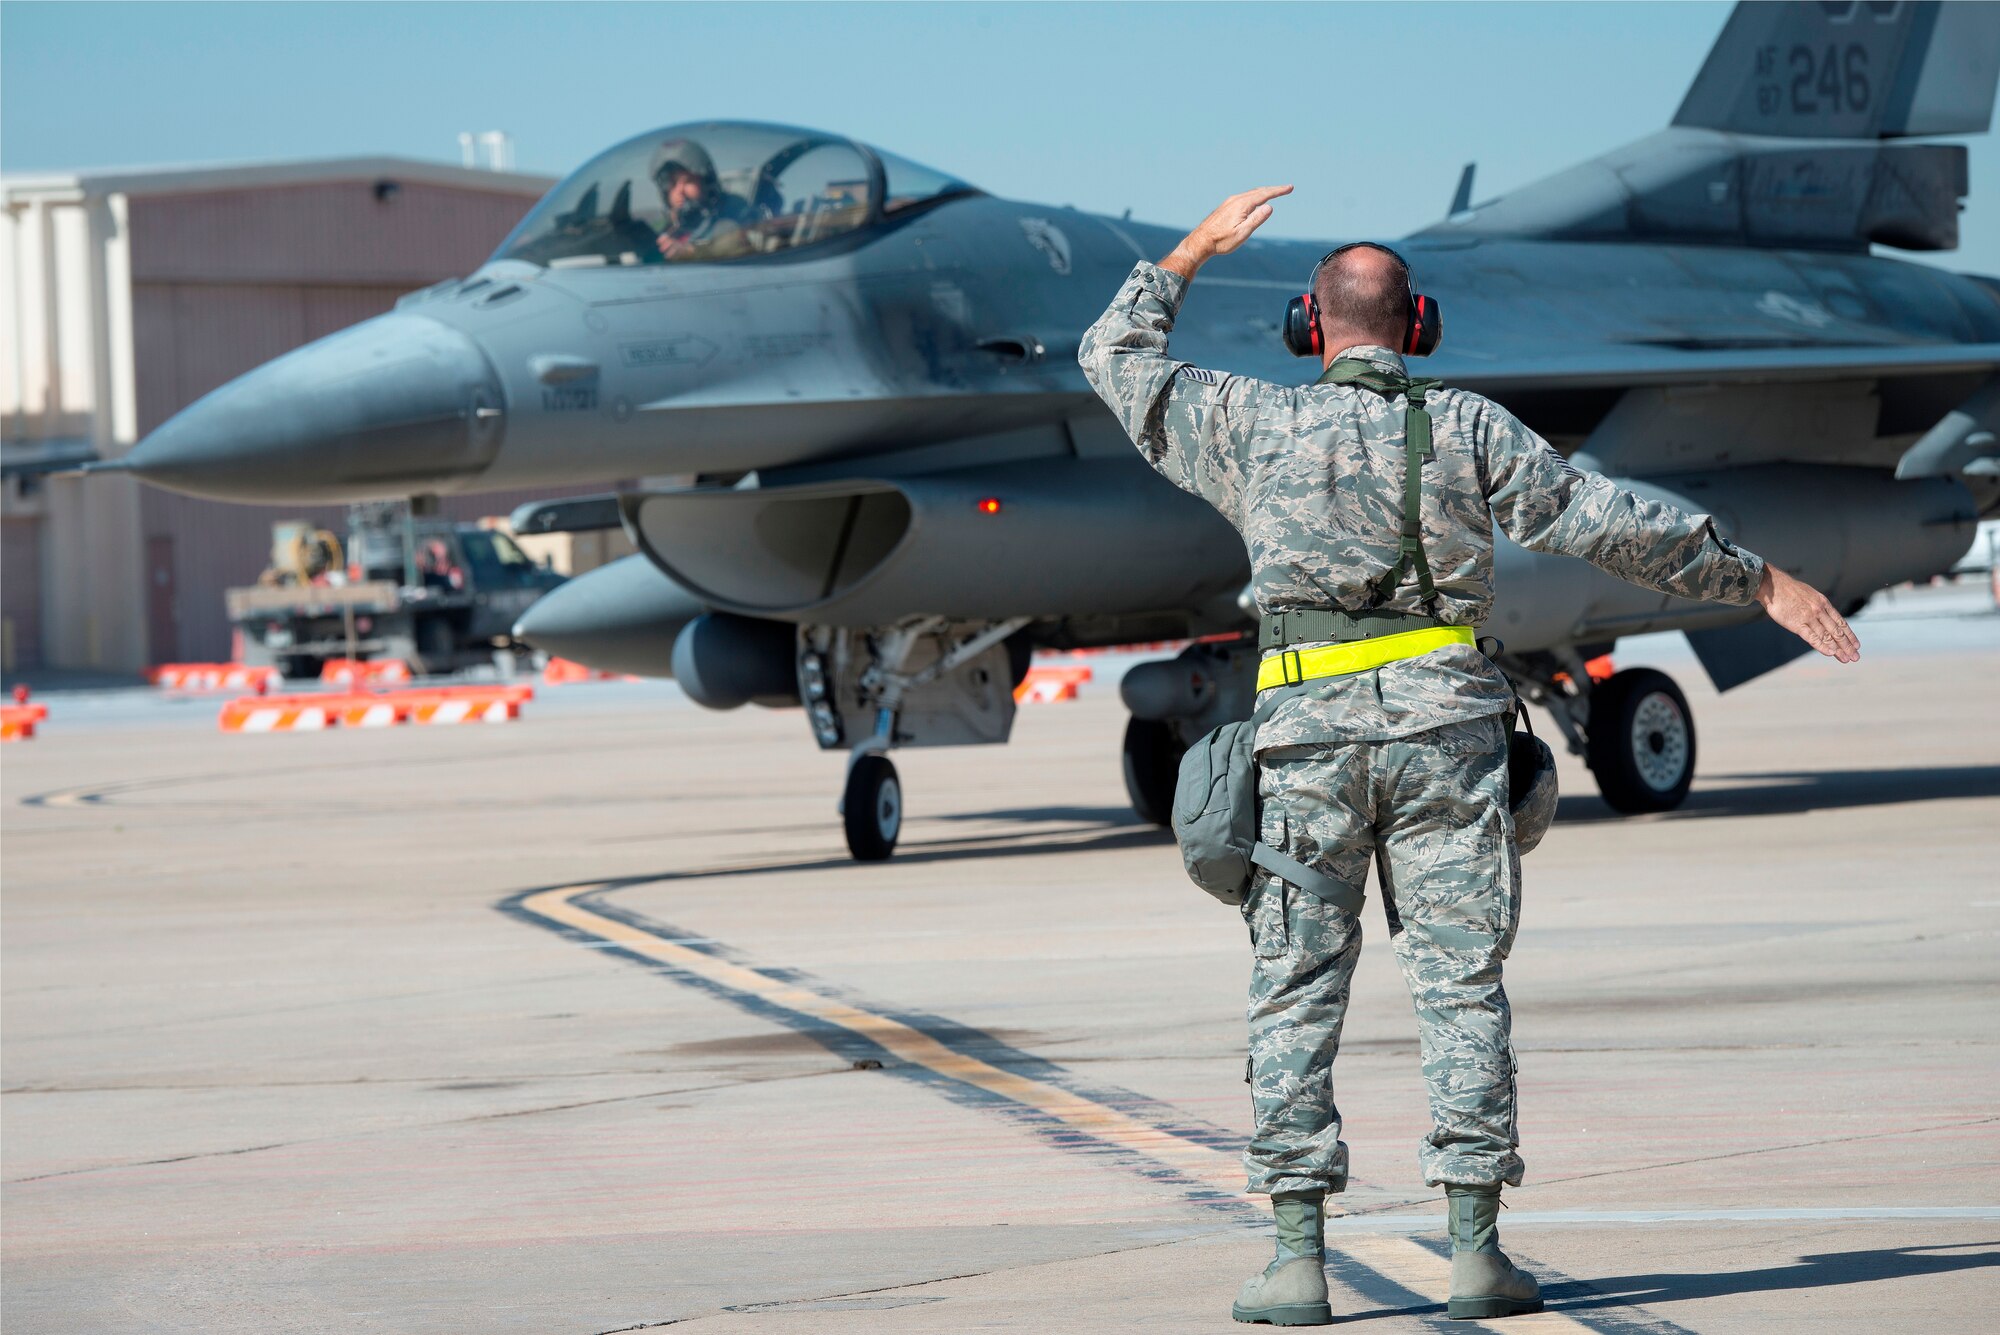 U.S. Air Force Tech. Sgt. Robbin Bruning, 140th Maintenance Squadron, Colorado Air National Guard, ushers in an F-16 Fighting Falcon during the wing’s readiness inspection at Buckley Air Force Base, Aurora, Colo., Oct. 16, 2015. This training is a part of the 140th Wing’s four-day Wing Wartime Readiness Inspection, the U.S. Air Force’s new evaluation system for wartime, contingency and force sustainment readiness. (U.S. Air National Guard photo by Tech. Sgt. Wolfram M. Stumpf)